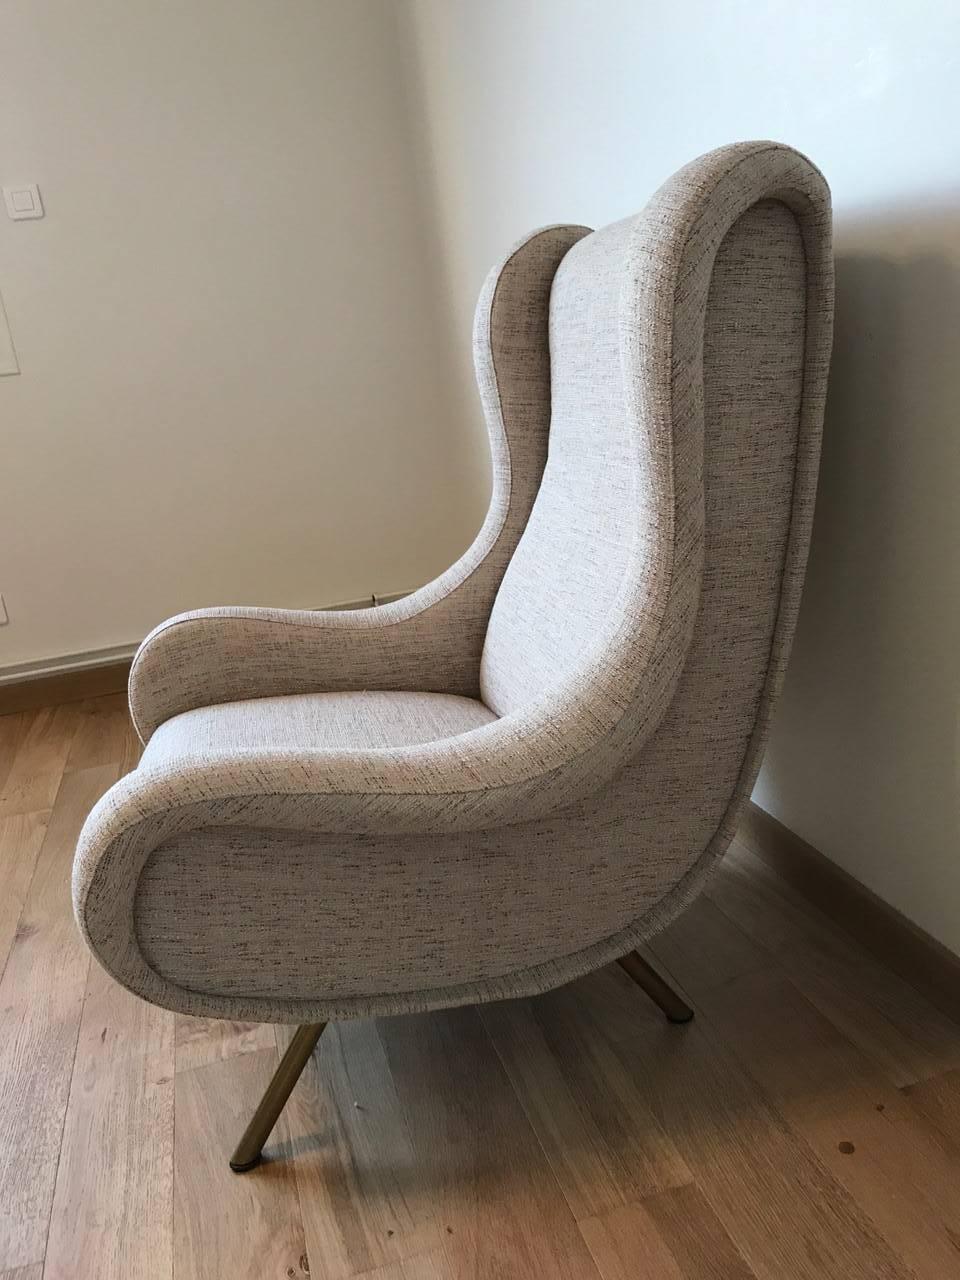 Senior armchair by Marco Zanuso for Arflex, recently reupholstered with a Kvadrat fabric.